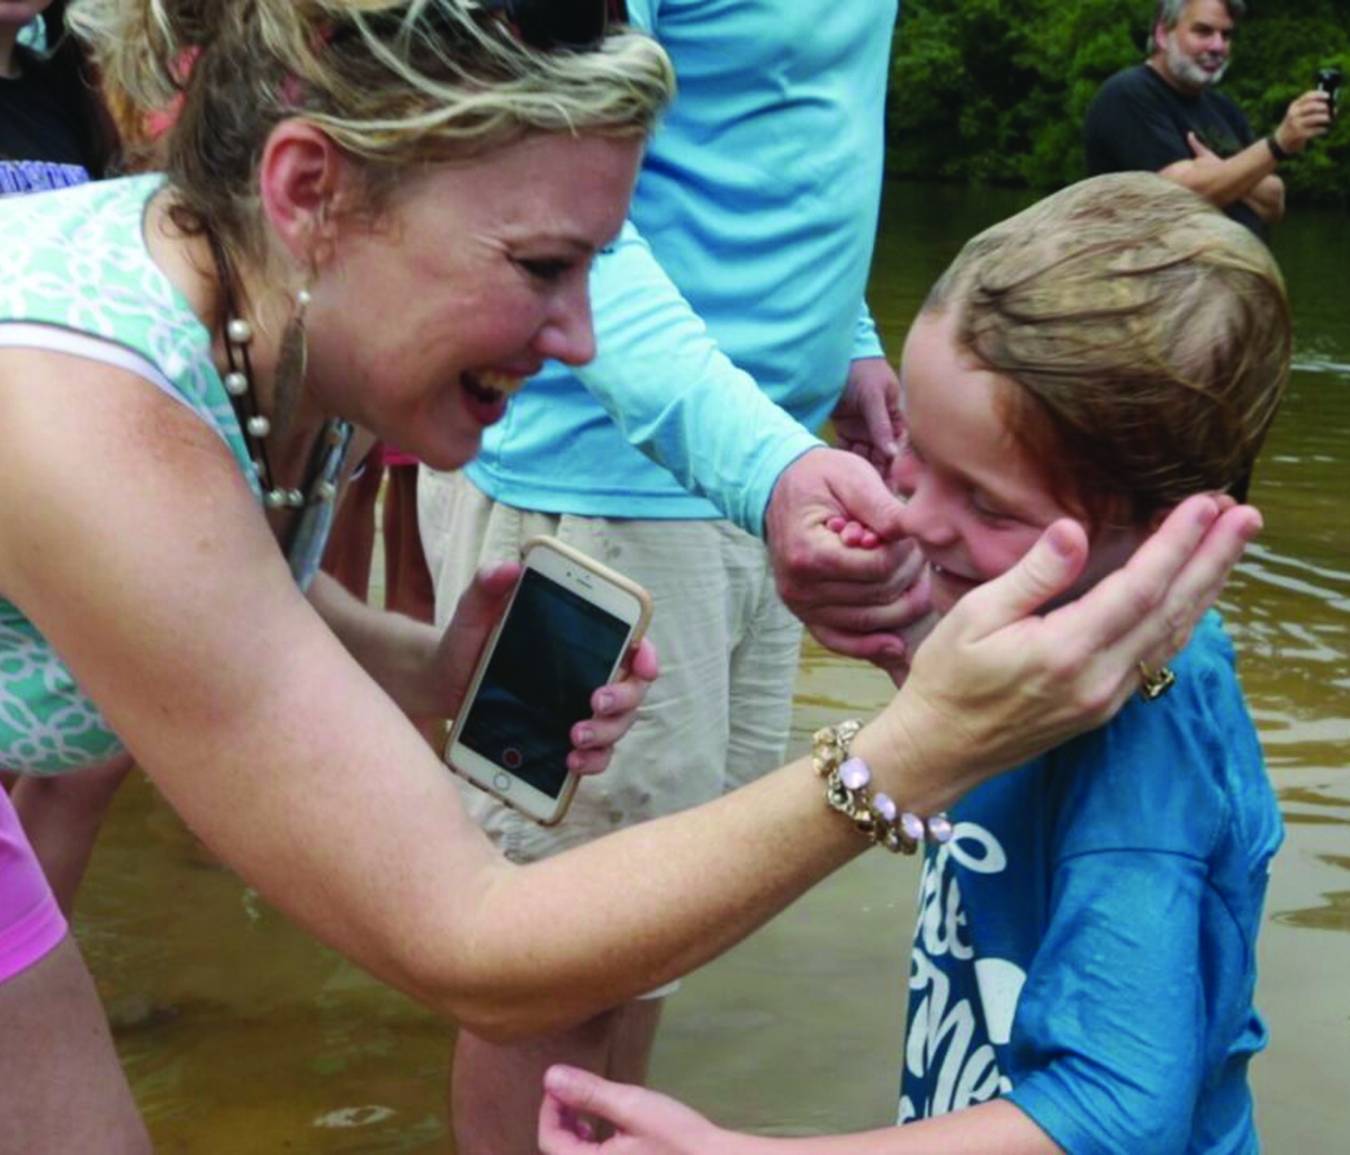 Renee Strickland (left) smiles as she congratulates her son, Harris, on being baptized Sept. 4. He was one of 77 baptized during a special service in the Bogue Falaya River in Covington.